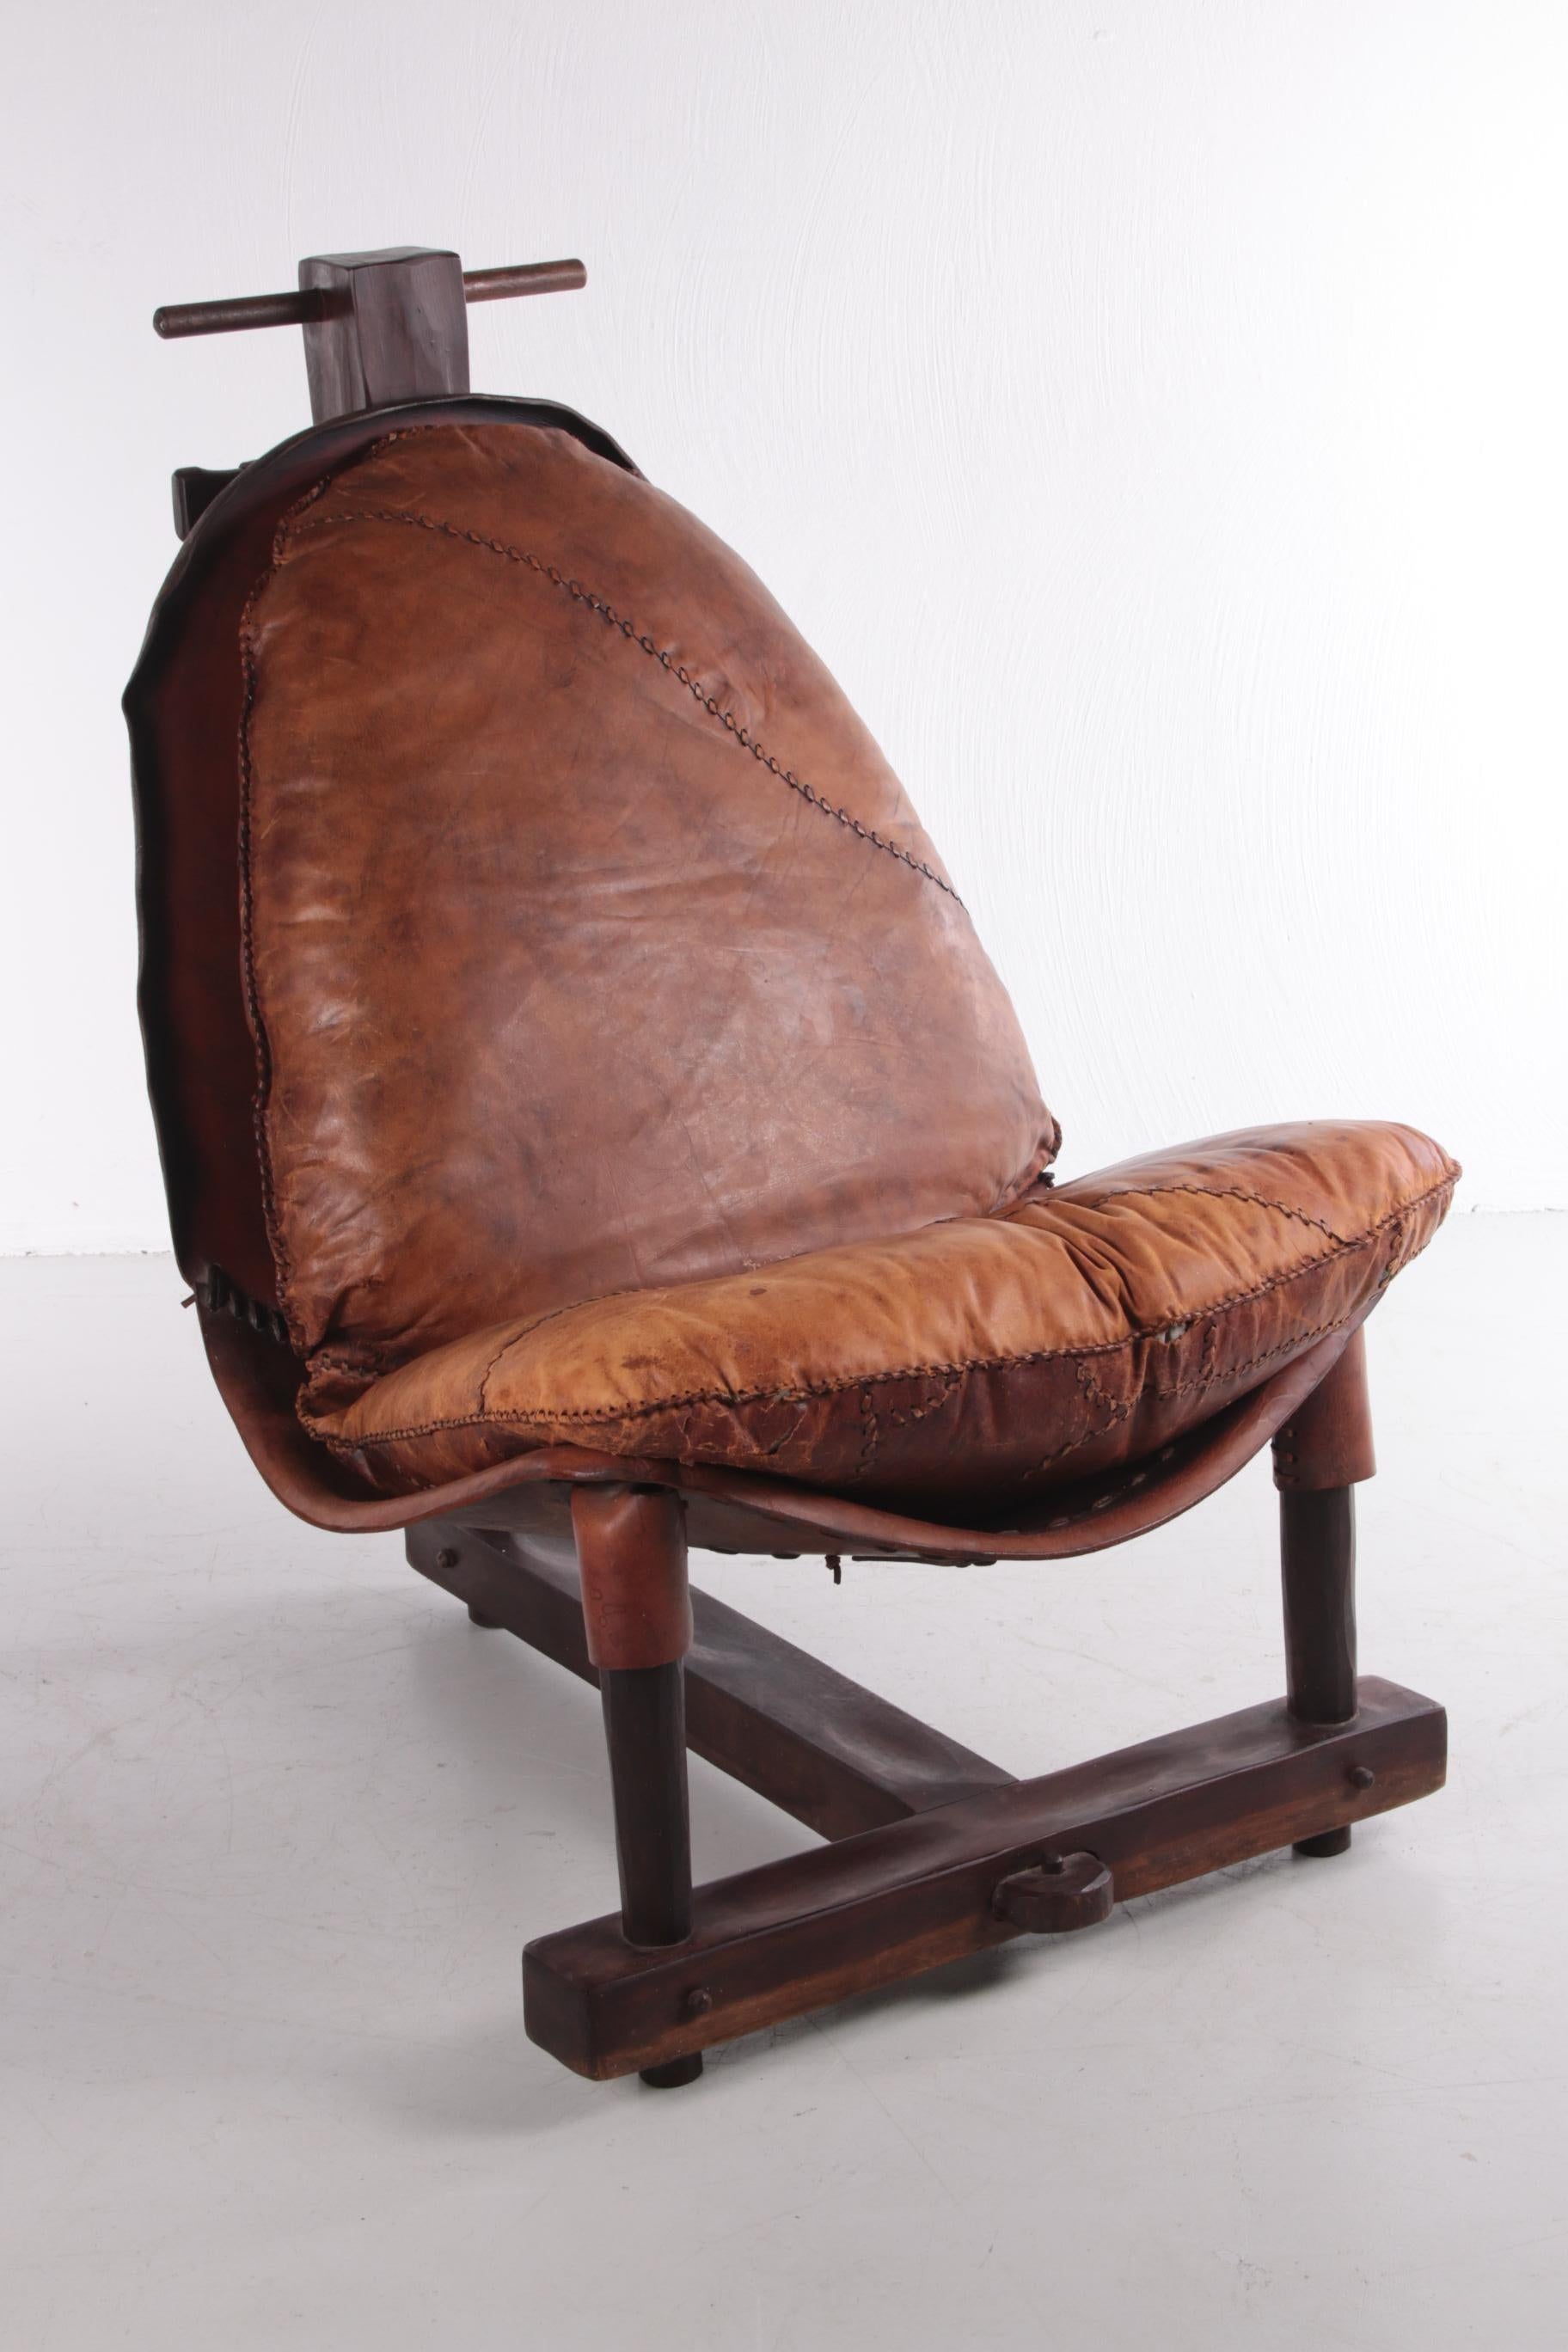 Brazilian Patched leather lounge chair, 1960s

Wow, what a rare catch!

This very special and unique easy chair comes all the way from Brazil.

A beautiful design through the use of natural materials.

Brazilian design is known for its